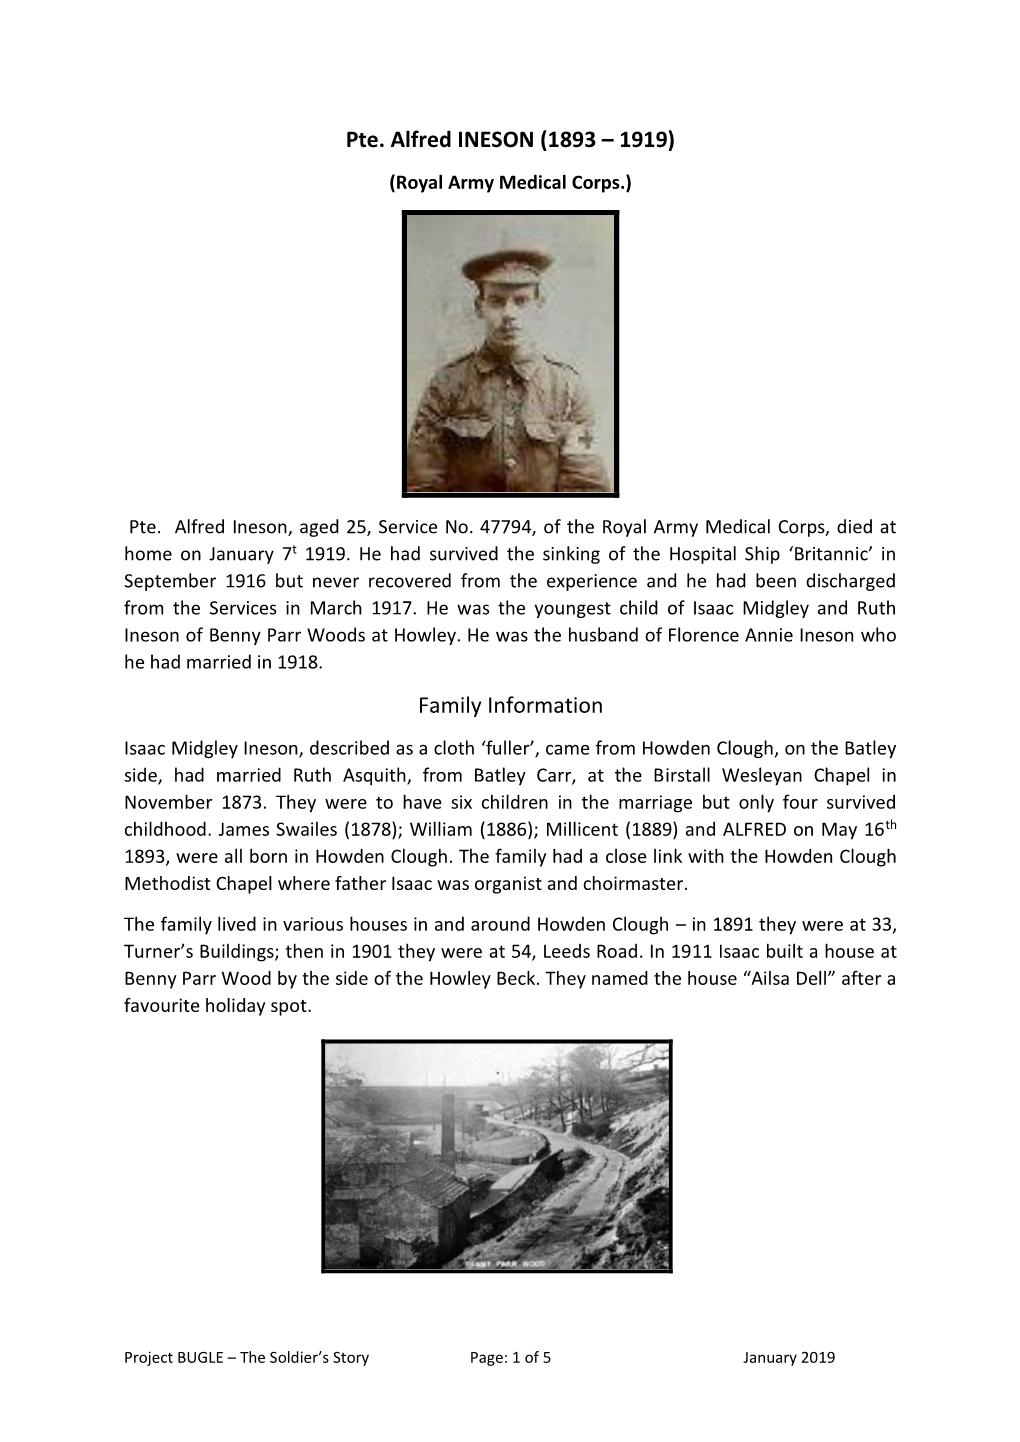 Pte. Alfred INESON (1893 – 1919) (Royal Army Medical Corps.)